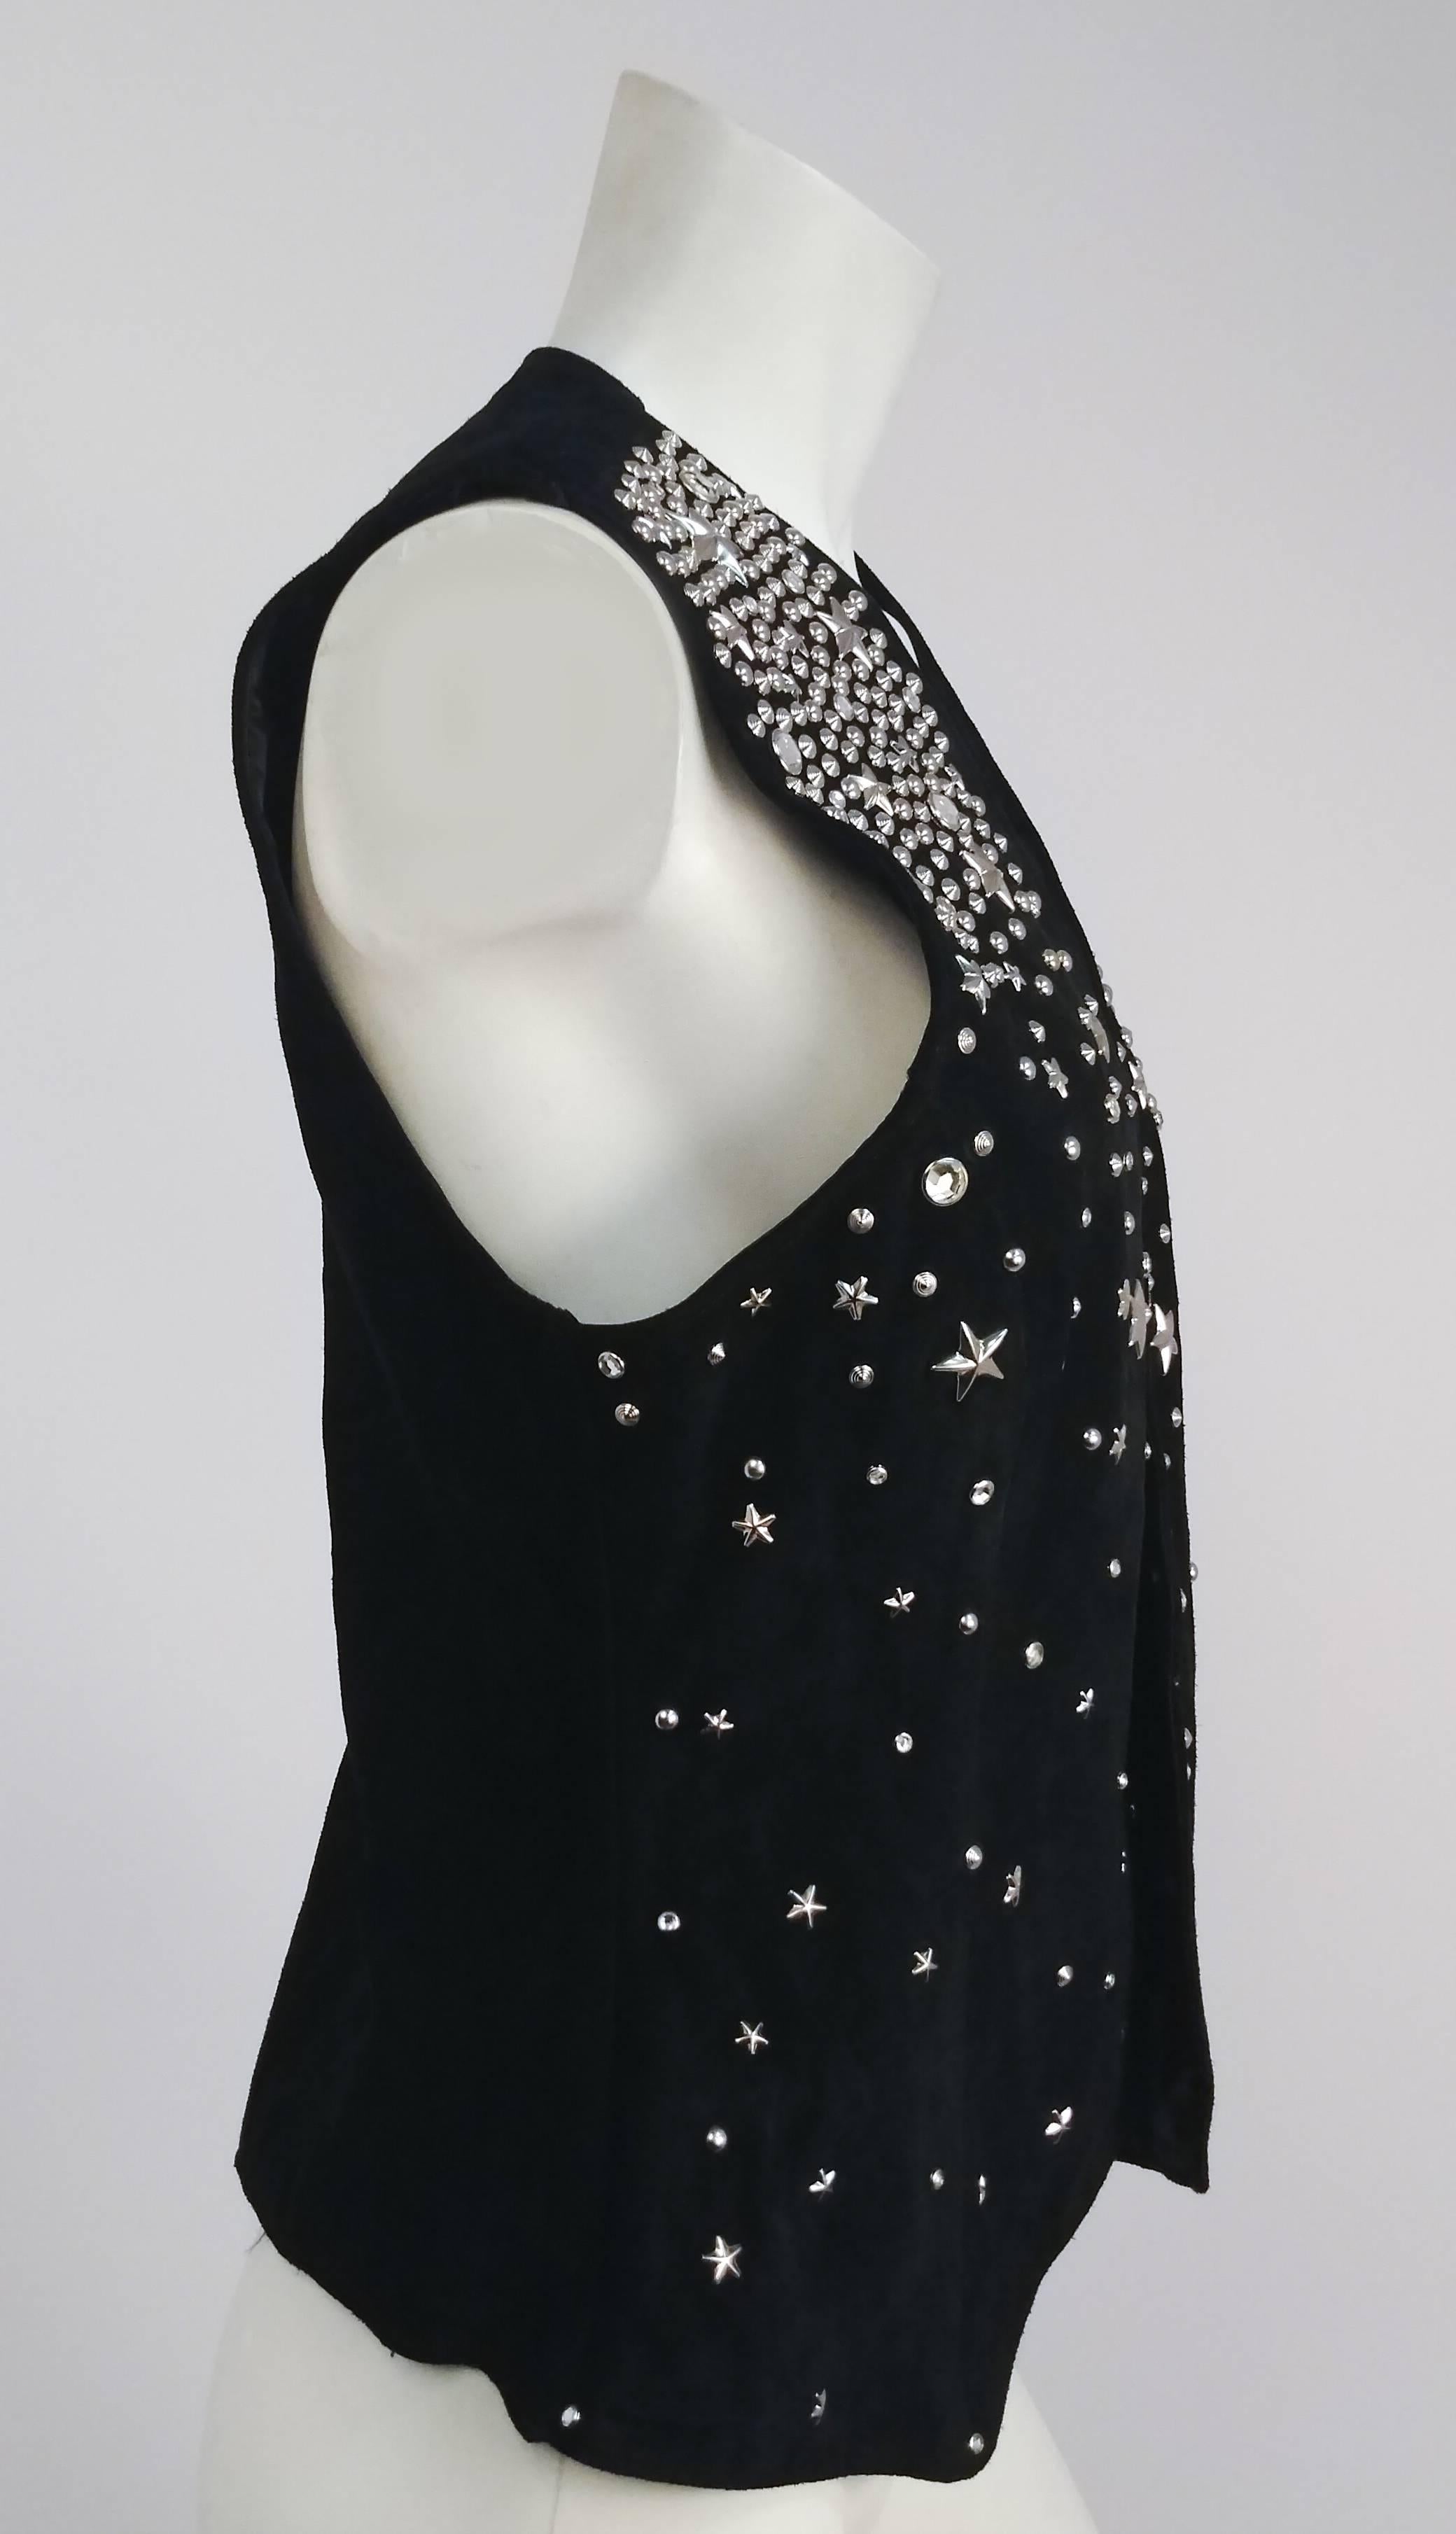 1980s Kathrine Baumann Studded and Rhinestone Suede Vest. Silver toned star and rhinestone studs. No closures. 